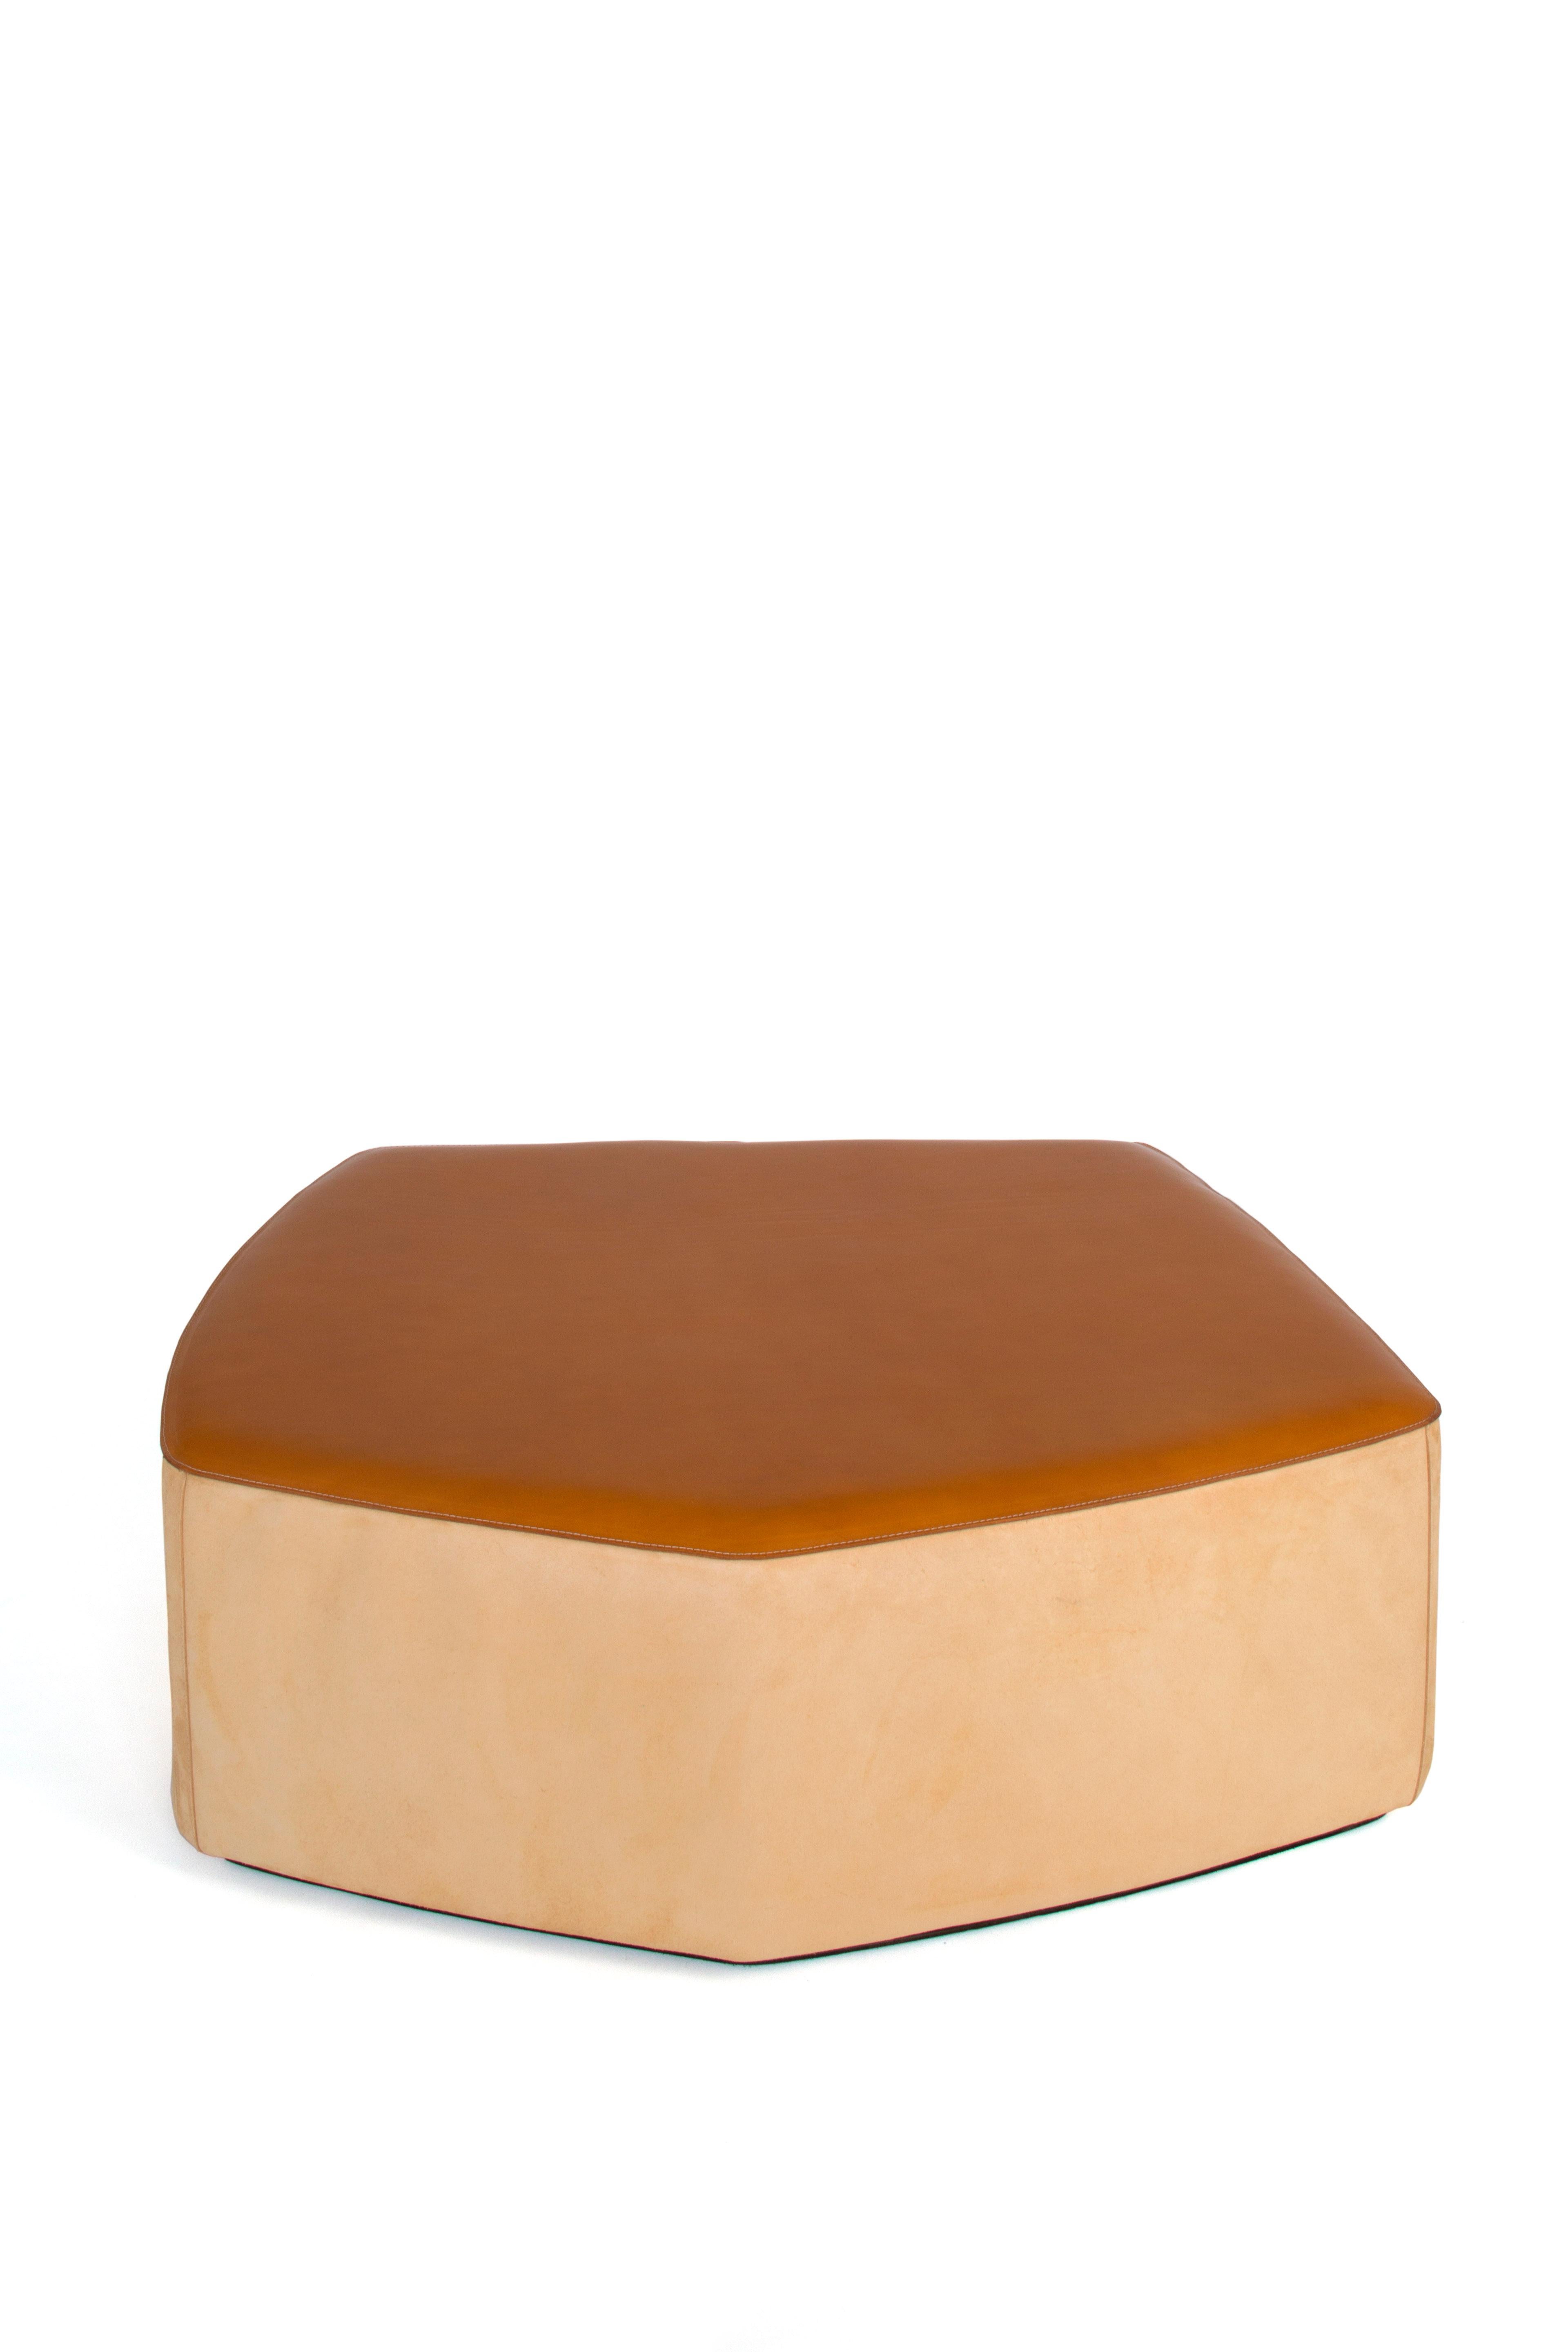 Large Pouf! leather stool by Nestor Perkal
Dimensiones: W 101 x D 85 x H 35 cm
Materials: leather, poplar plywood, suede.
Available in other colors and in 3 sizes.

The POUF! collection is made up of three seats made of leather and suede. They